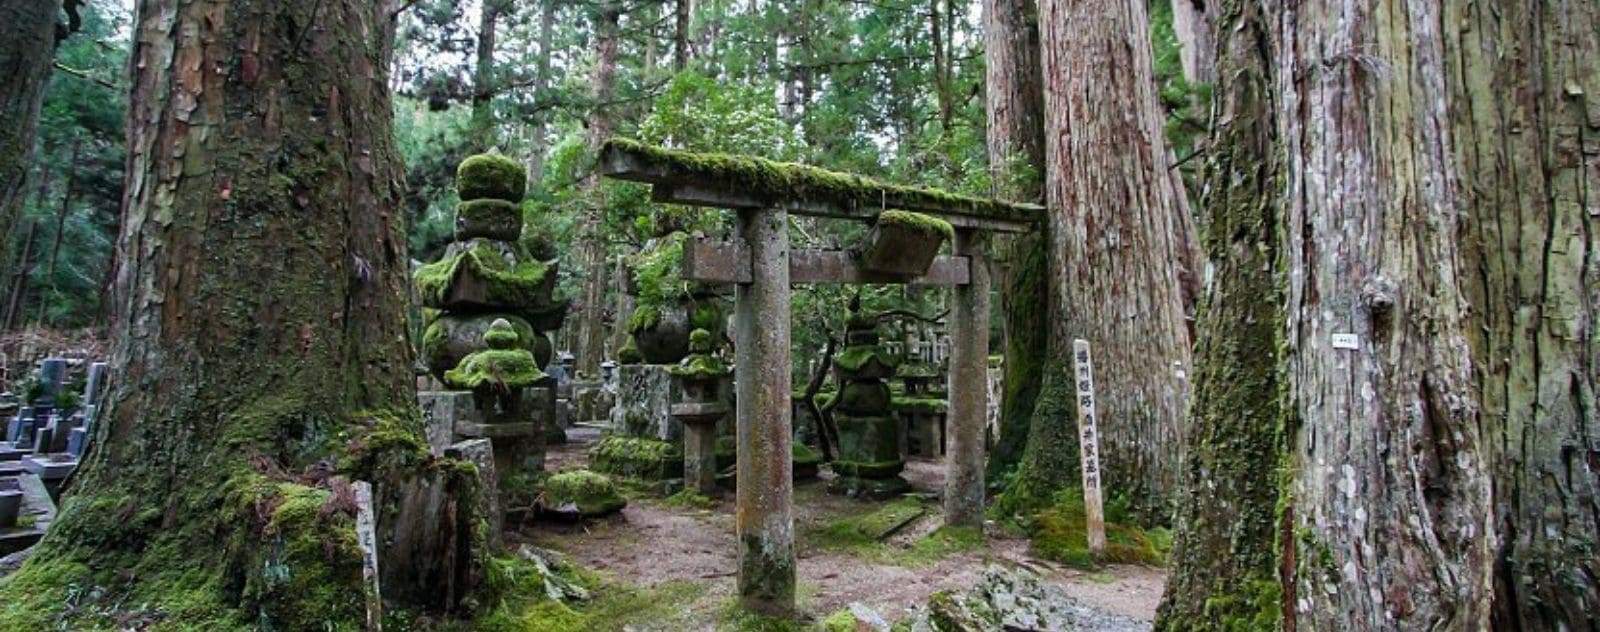 THE TEMPLE OF OKUNOIN